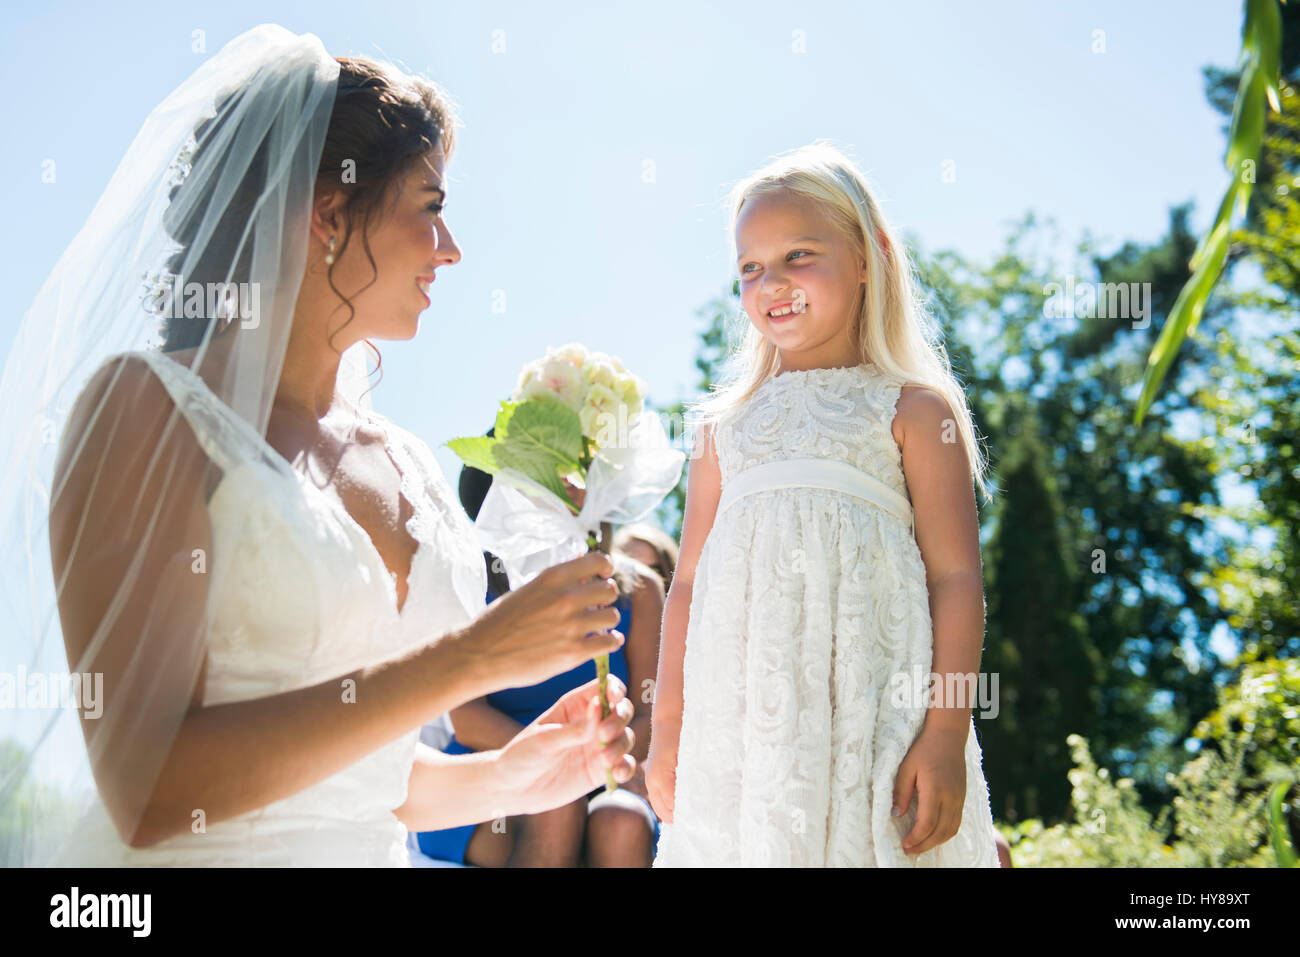 A bride and a young bridesmaid on the day of her wedding Stock Photo